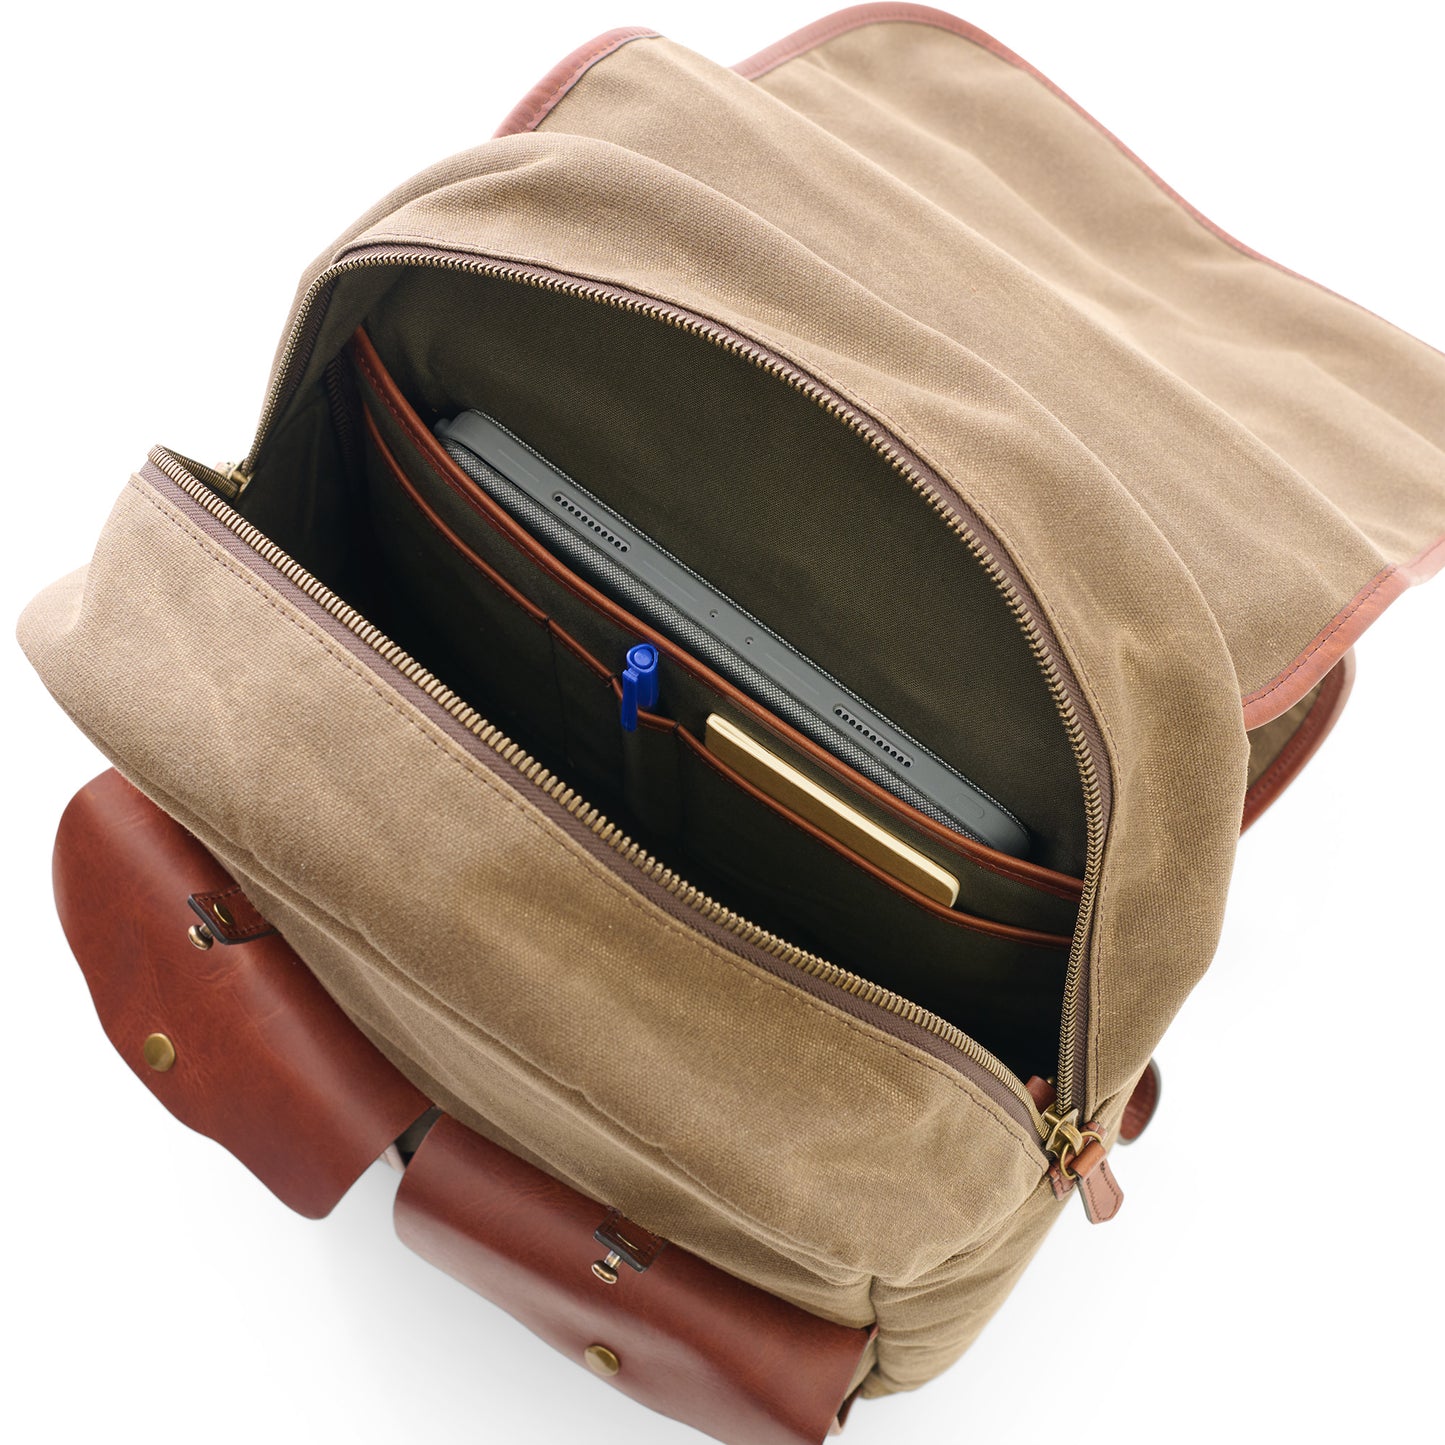 Founder's Backpack inside view full, leather & waxed canvas men's backpack